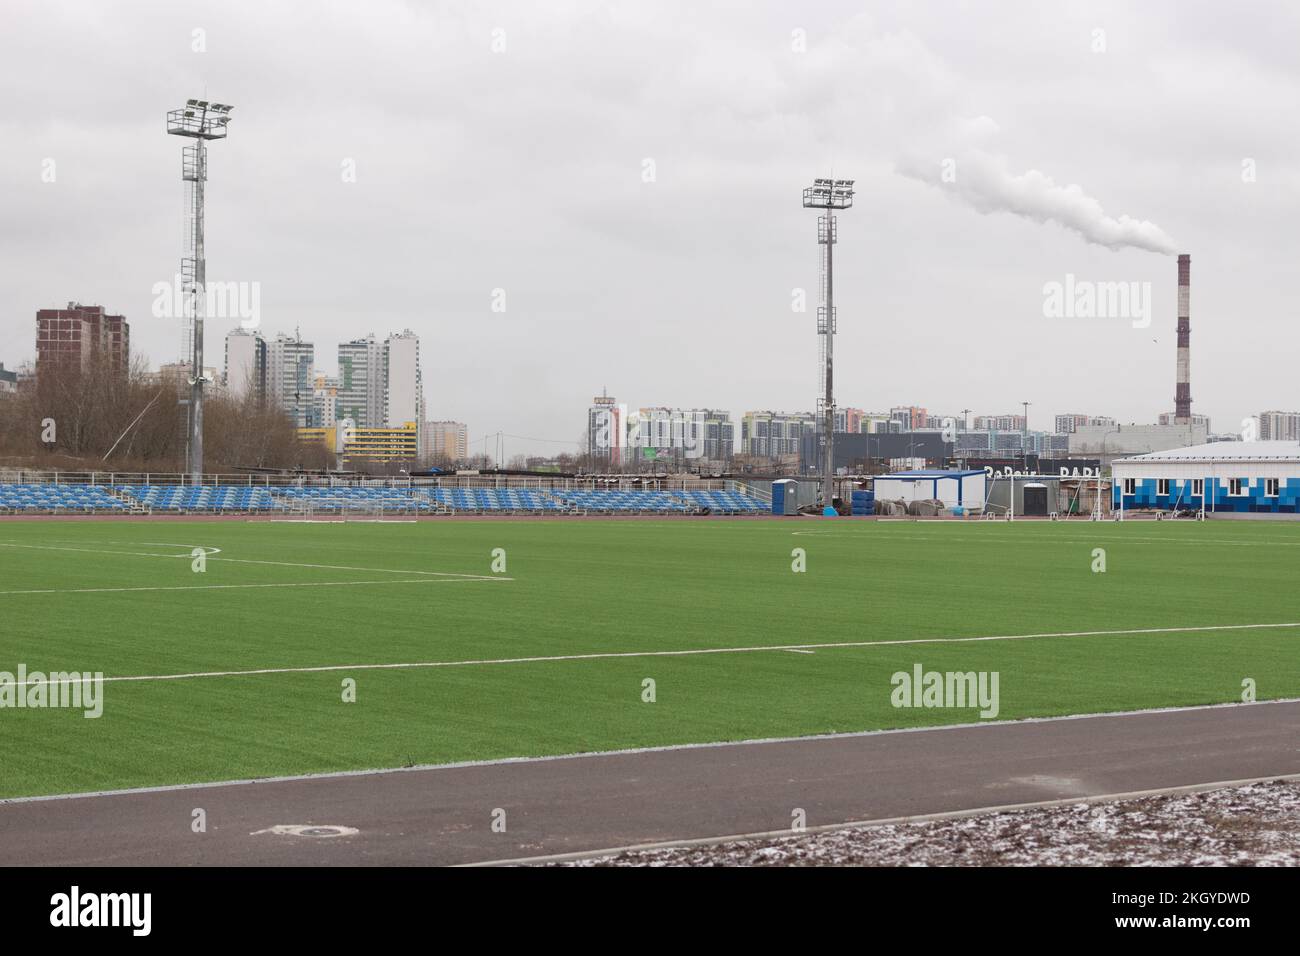 New football field on Parachute Street in the Primorsky district of St. Petersburg, Russia Stock Photo